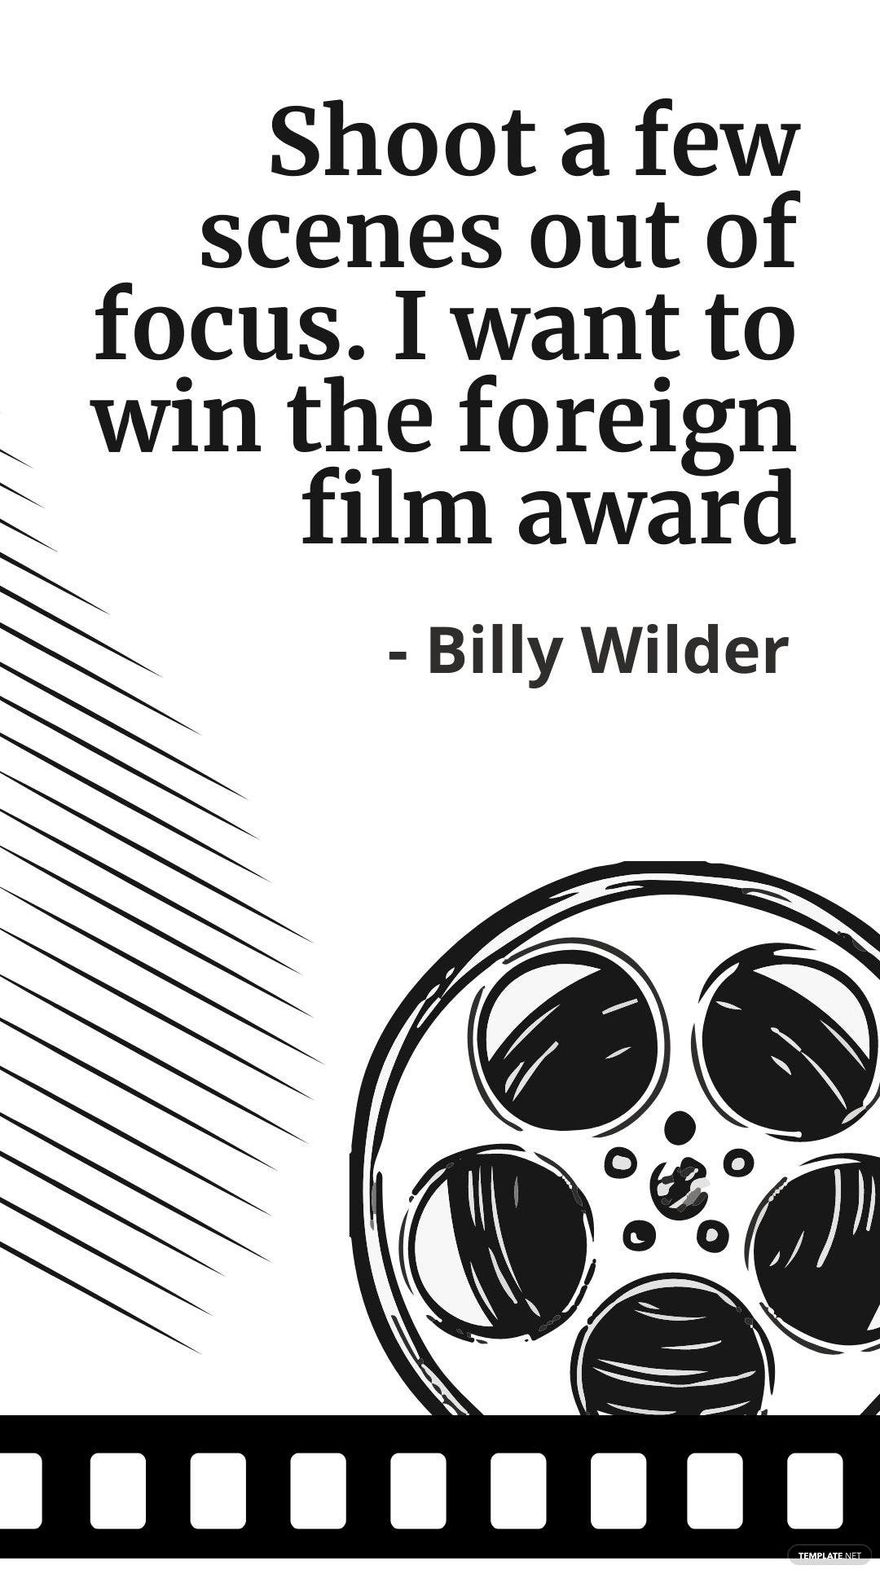 Free Billy Wilder - Shoot a few scenes out of focus. I want to win the foreign film award in JPG